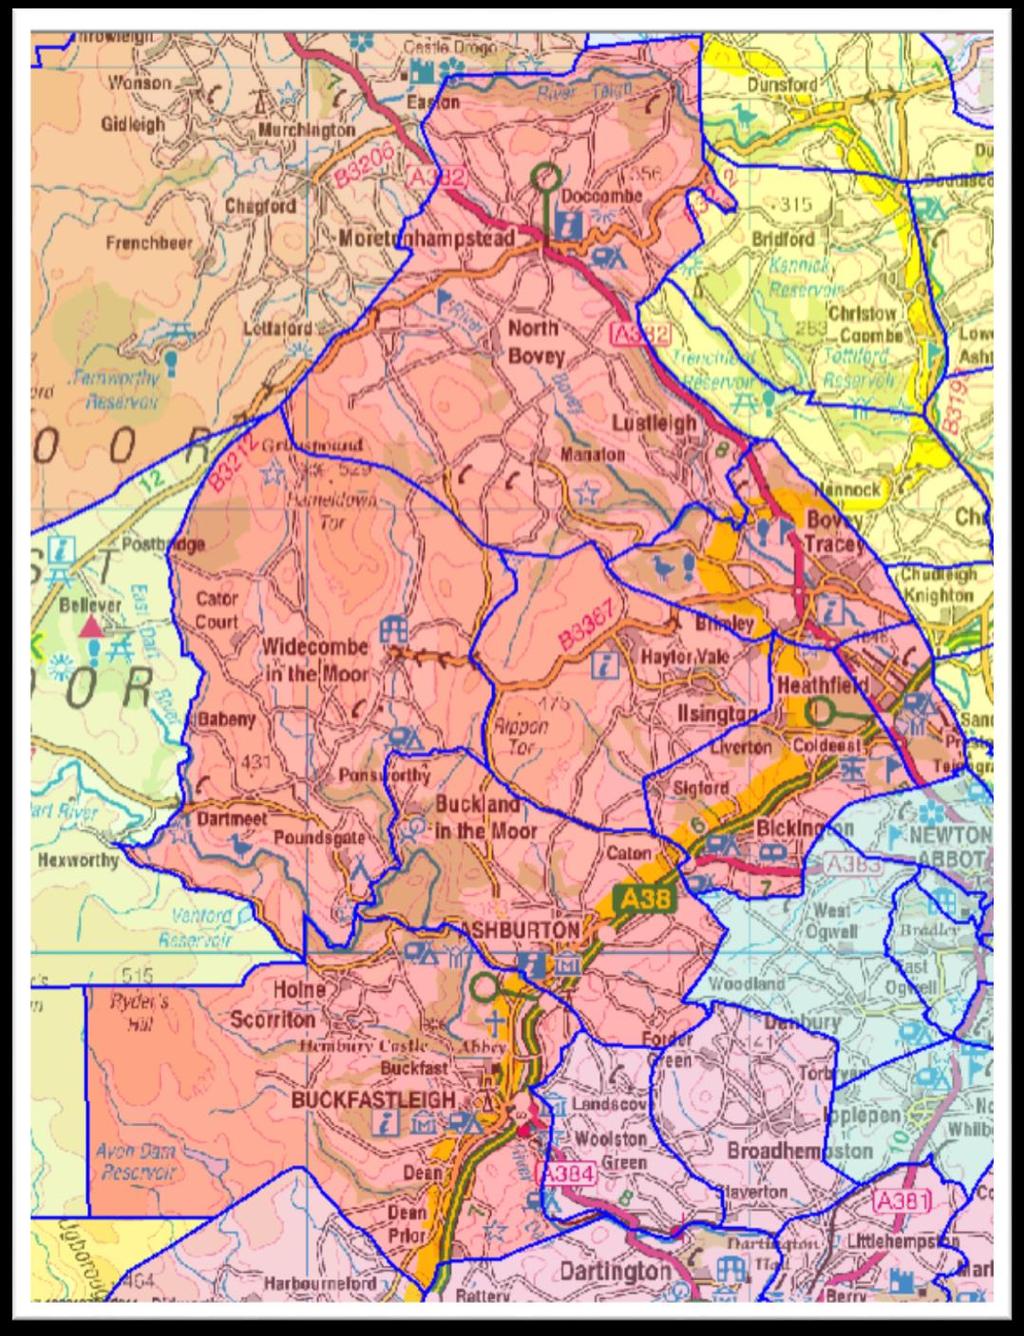 South Dartmoor Community College Learning together. Designated Area Map For 2015-16 Our designated area is the dark orange shaded area bounded by a dark blue line.